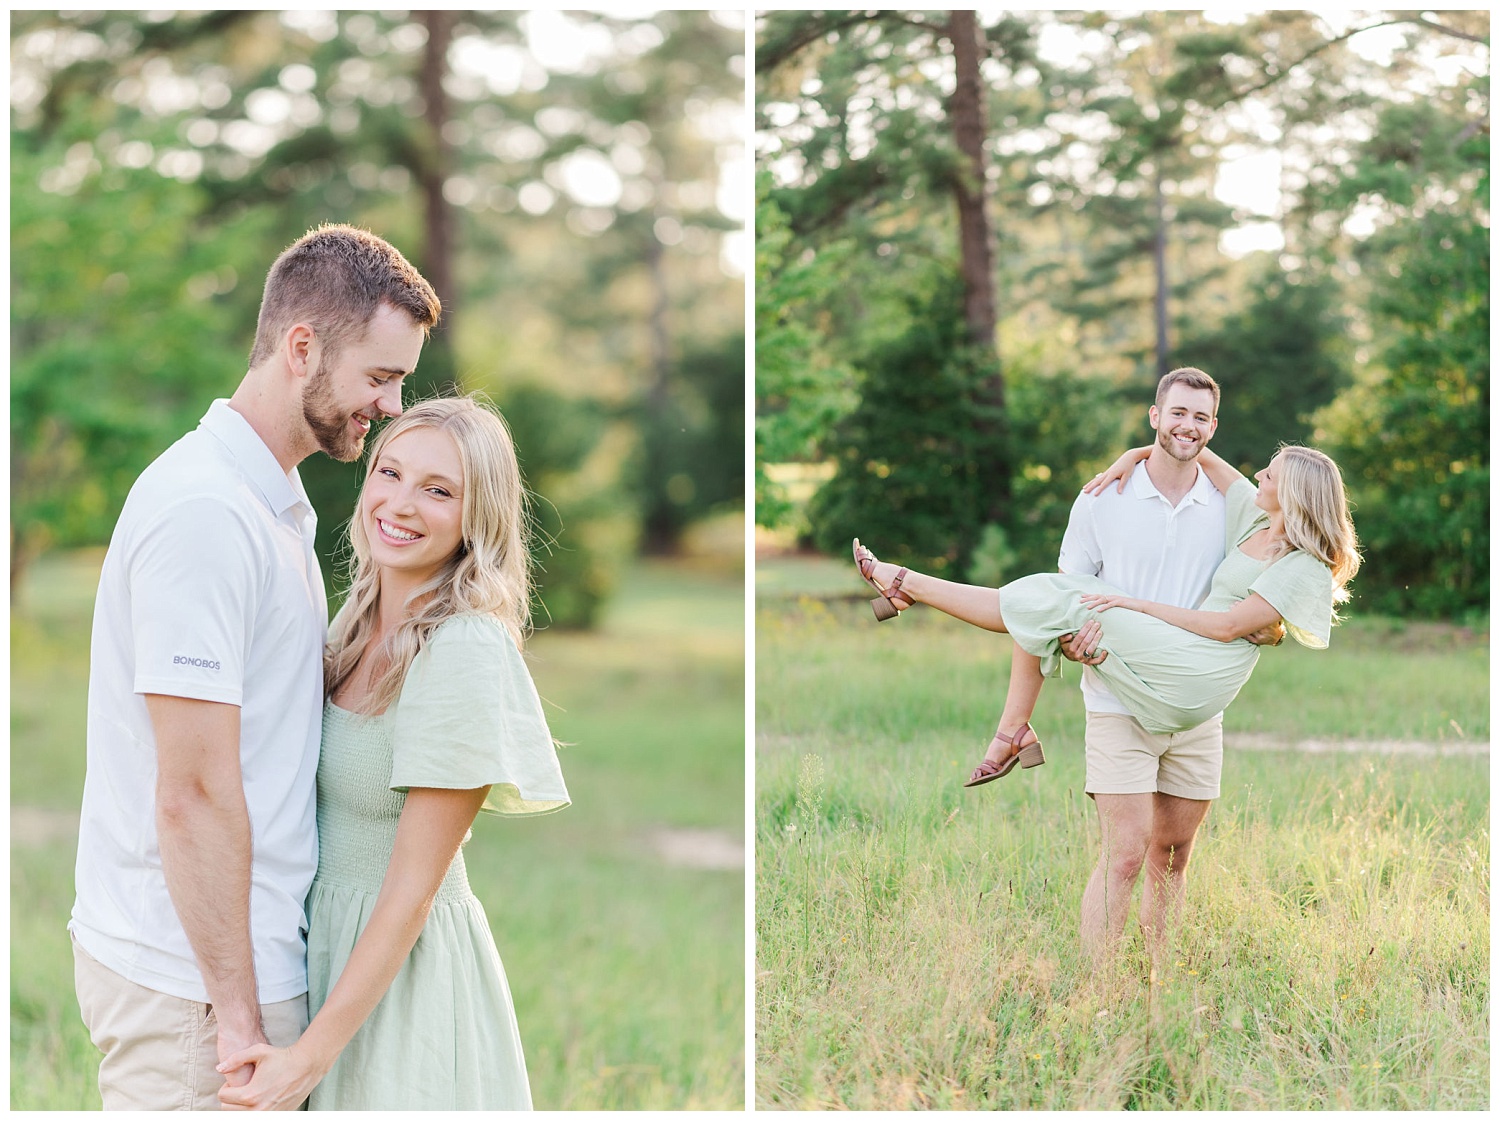 man carrying his fiance during engagement photos in North Carolina